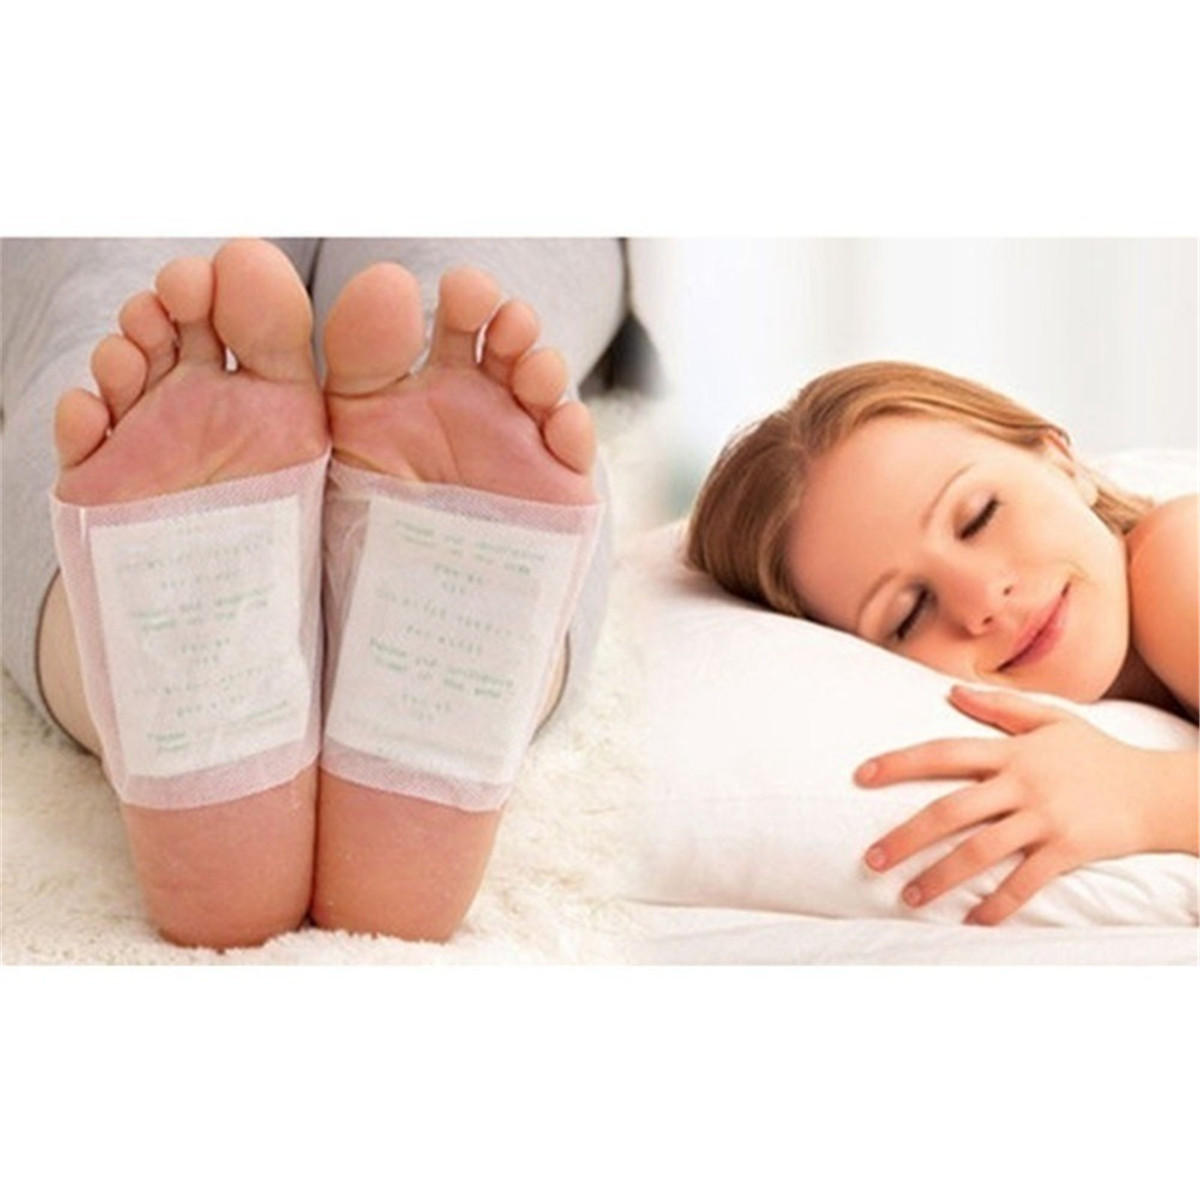 

50pcs Anti-swelling Ginger Detox Foot Patch improve Sleep Health Care Slimming Patch